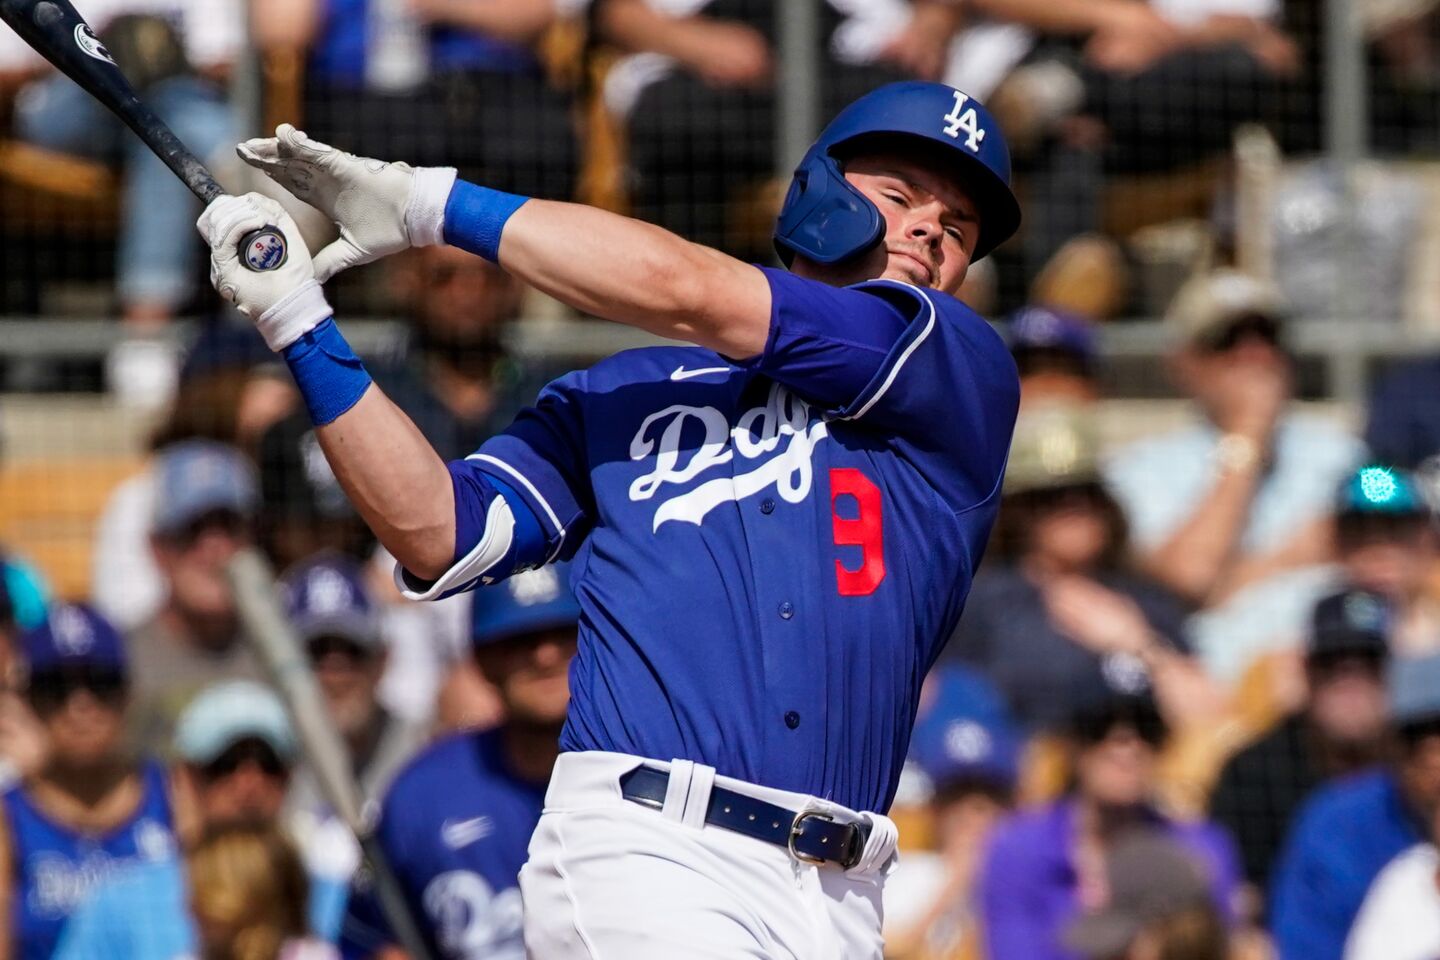 Dodgers shortstop Gavin Lux swings at a pitch during a spring training exhibition game against the Chicago Cubs on Feb. 23, 2020.